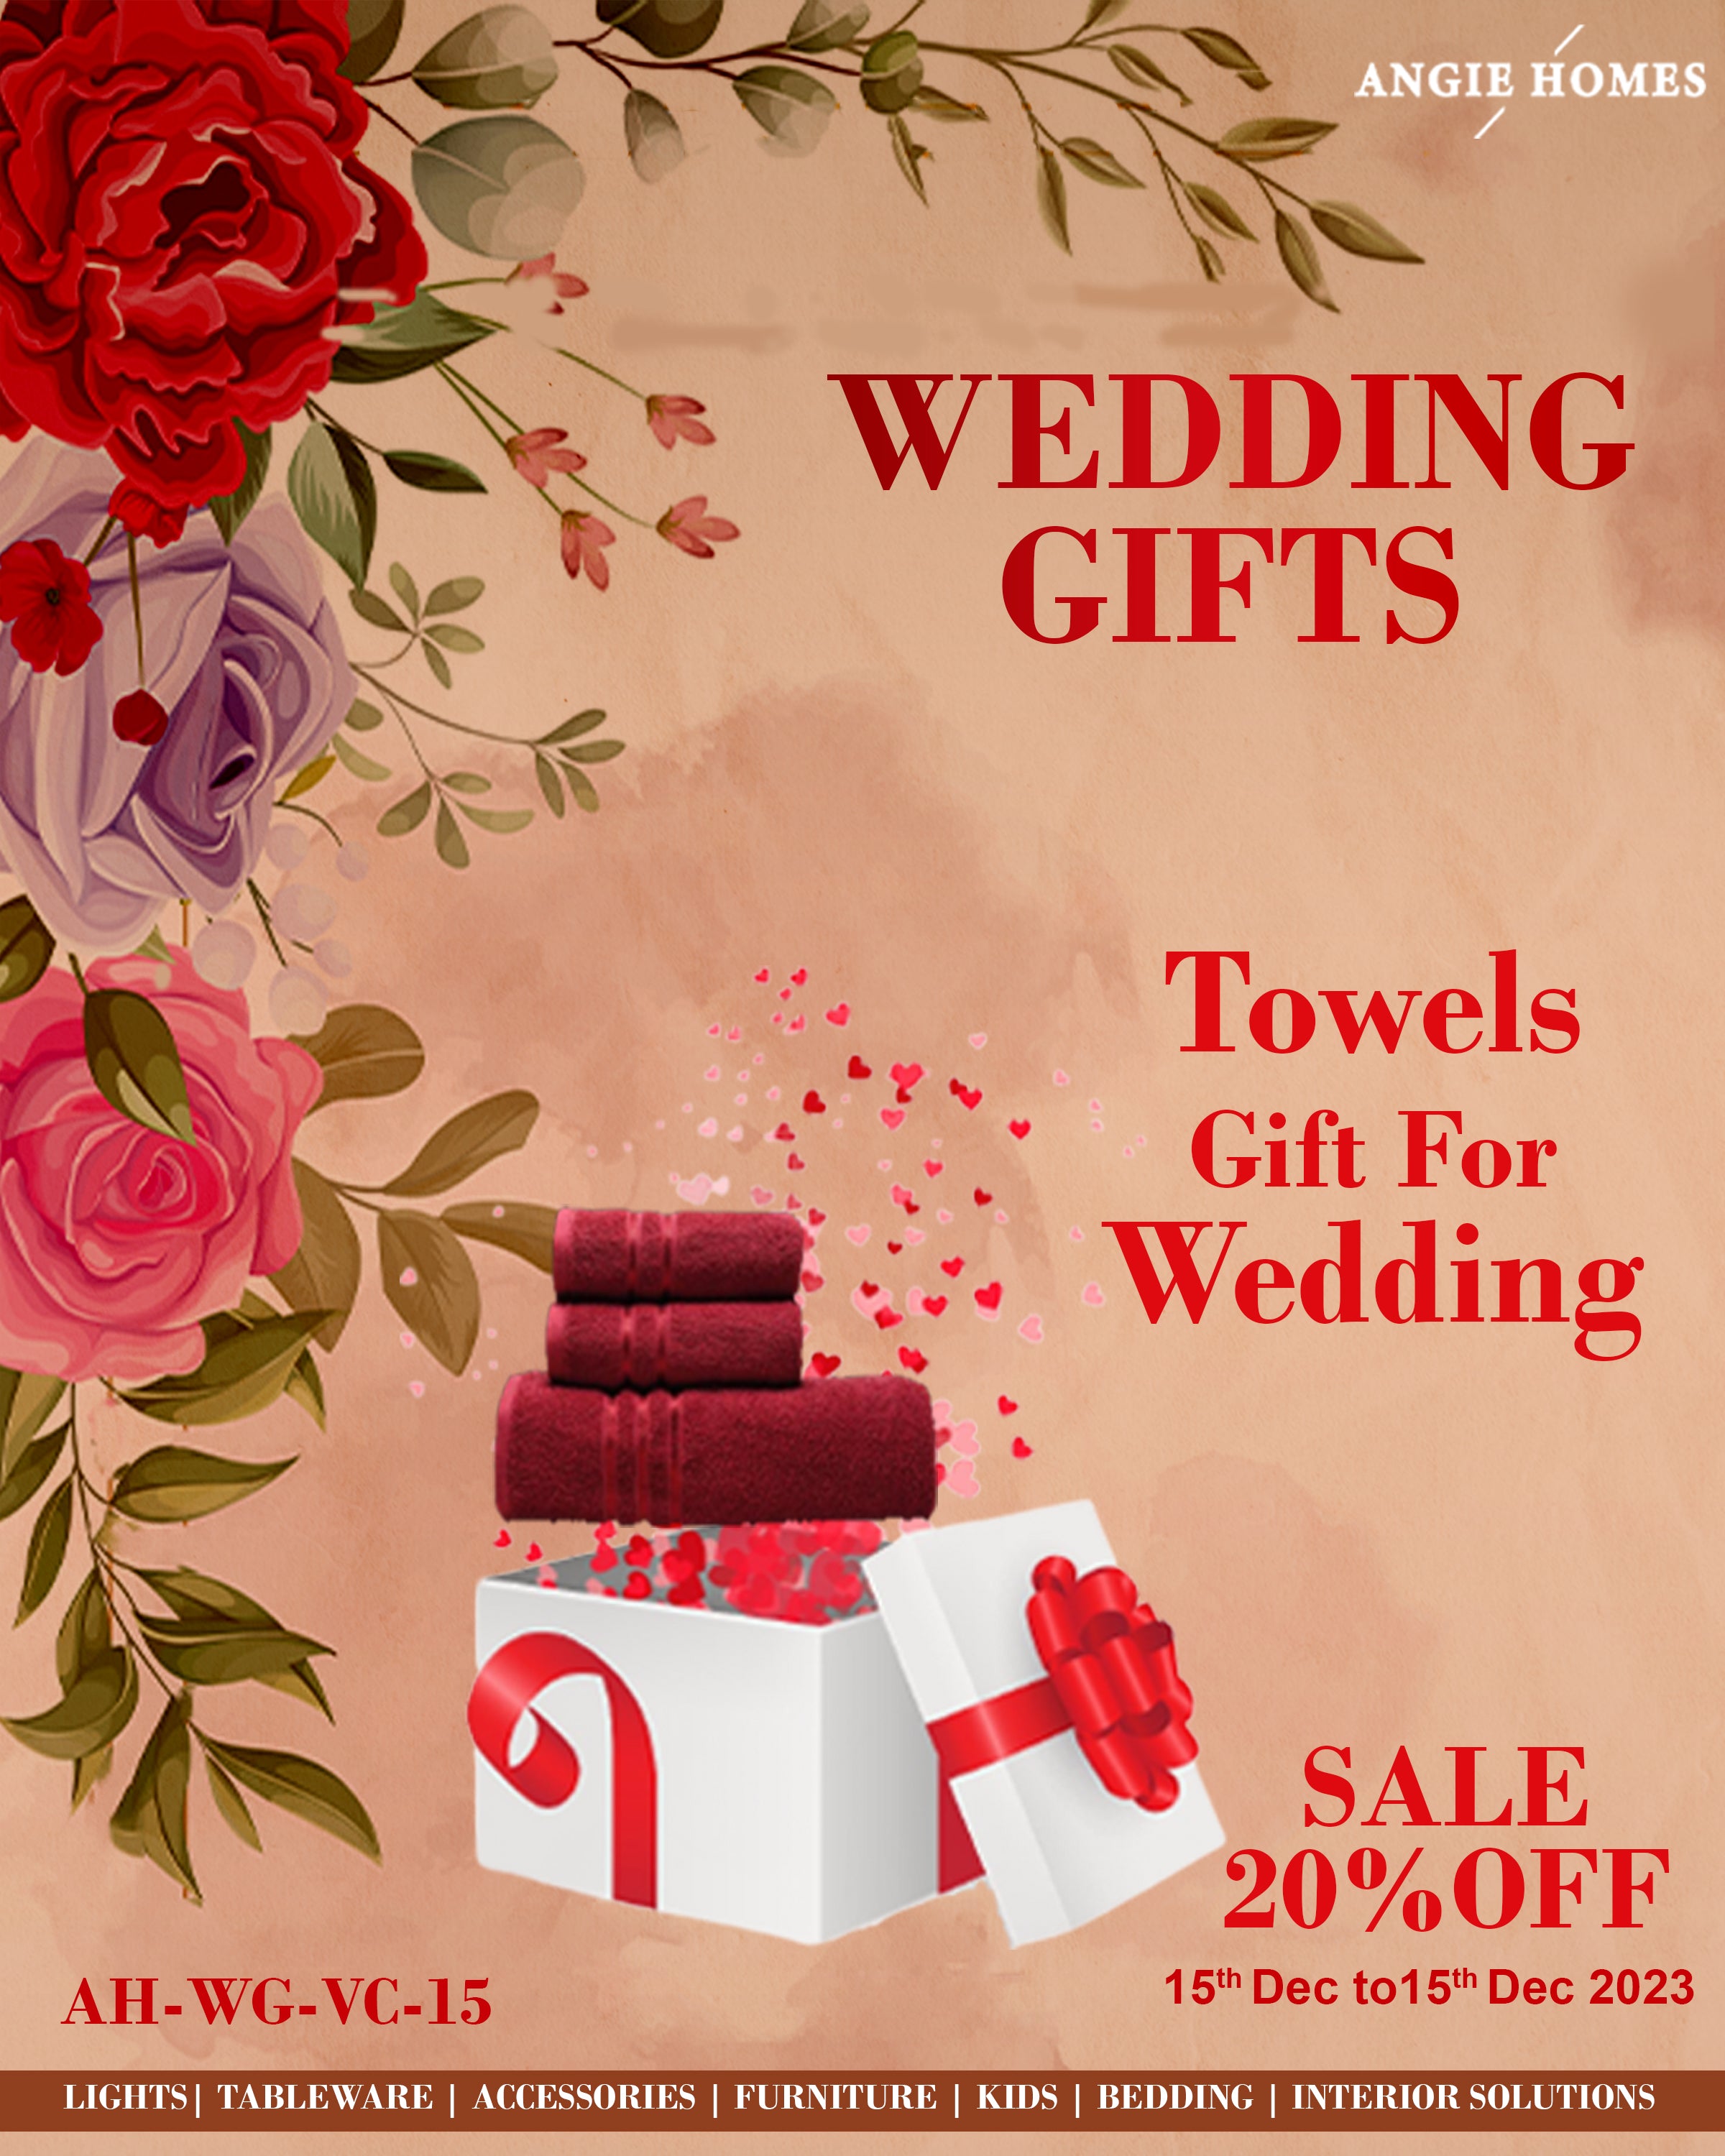 TOWEL SET FOR WEDDING GIFTS | MARRIAGE GIFT VOUCHER | GUEST GIFTTING CARD ANGIE HOMES